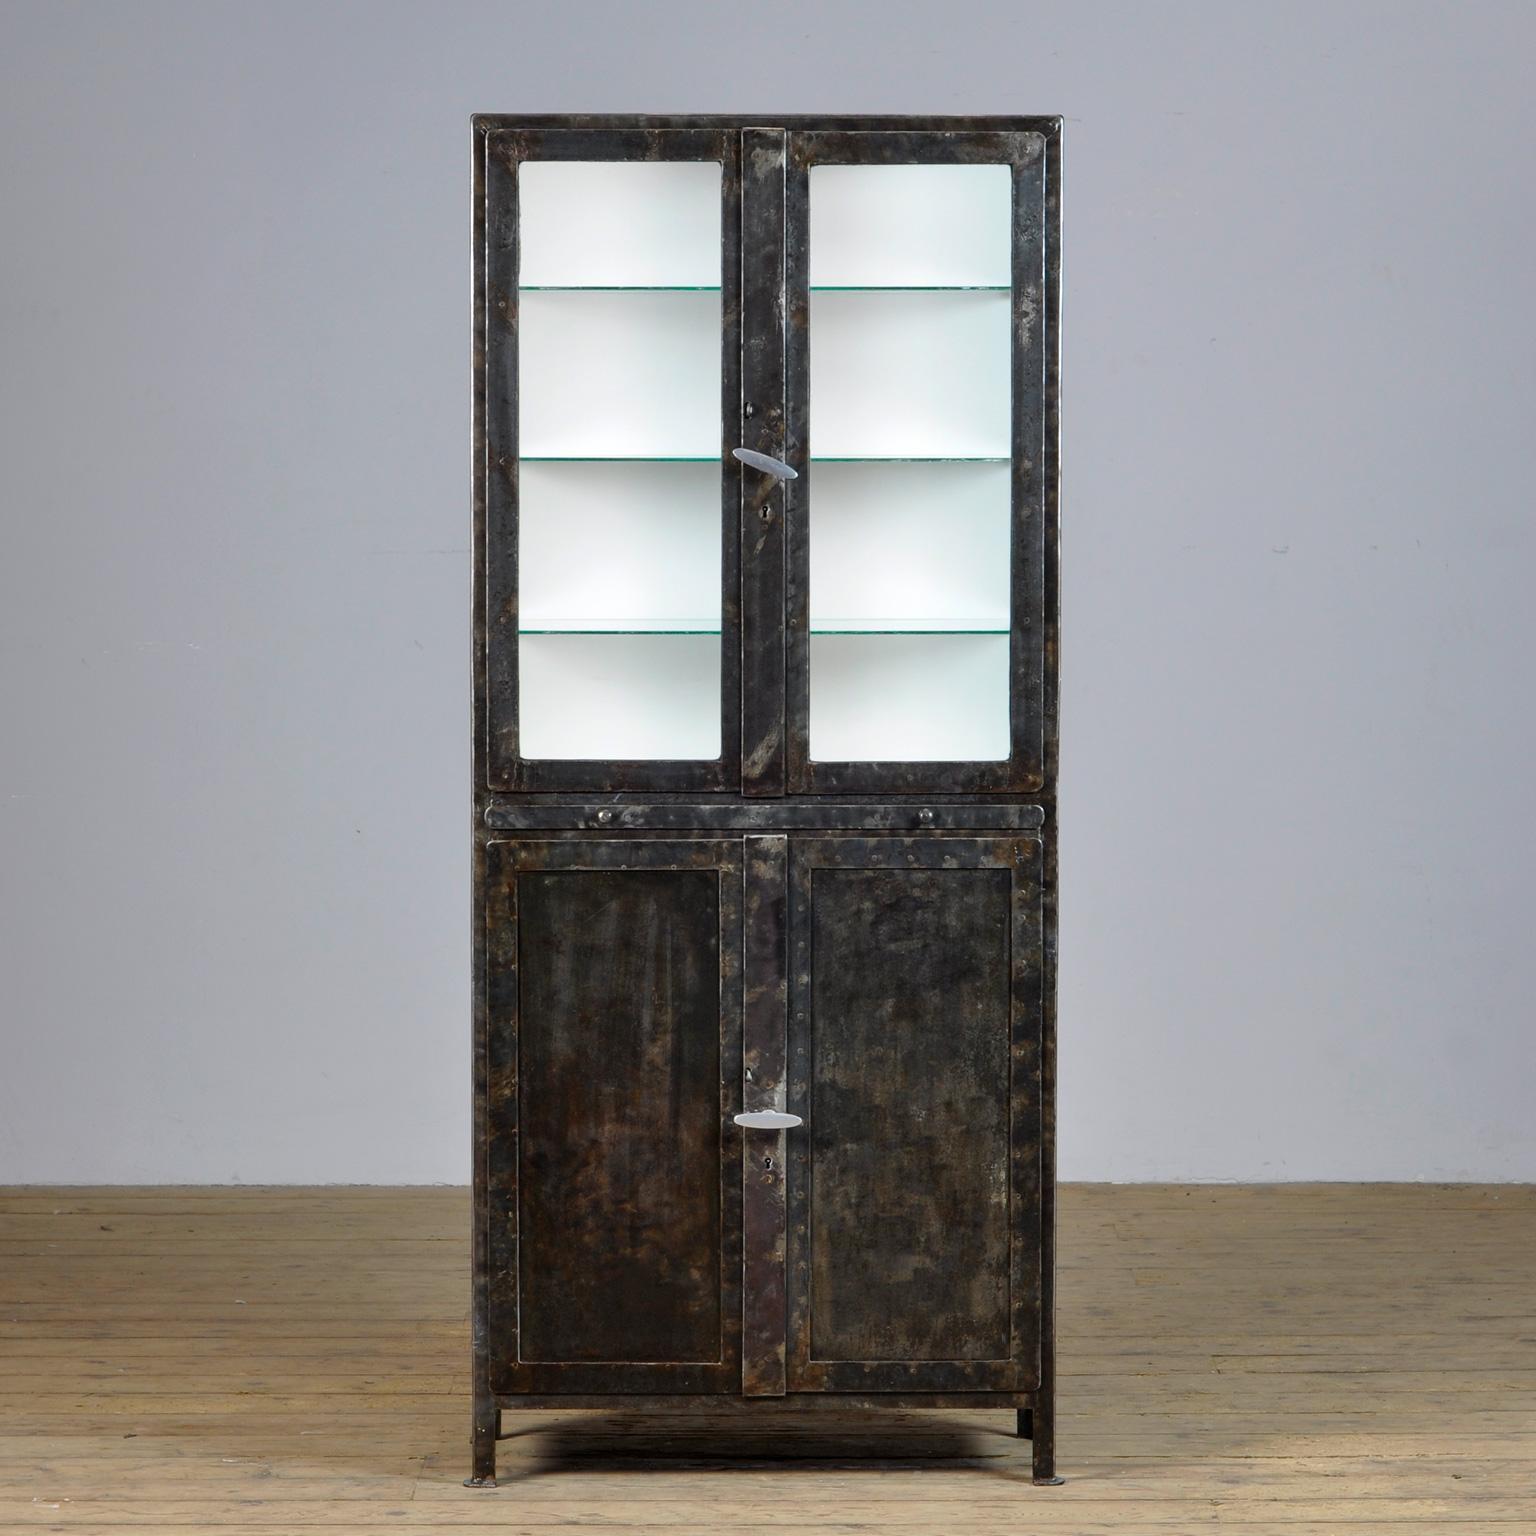 Riveted medicine cabinet from the 1920s. The case has been stripped of the paint on the outside and polished. The cabinet has an extendable worktop where instruments could be placed. Behind the 2 lower doors 2 drawers and two shelves. The cabinet